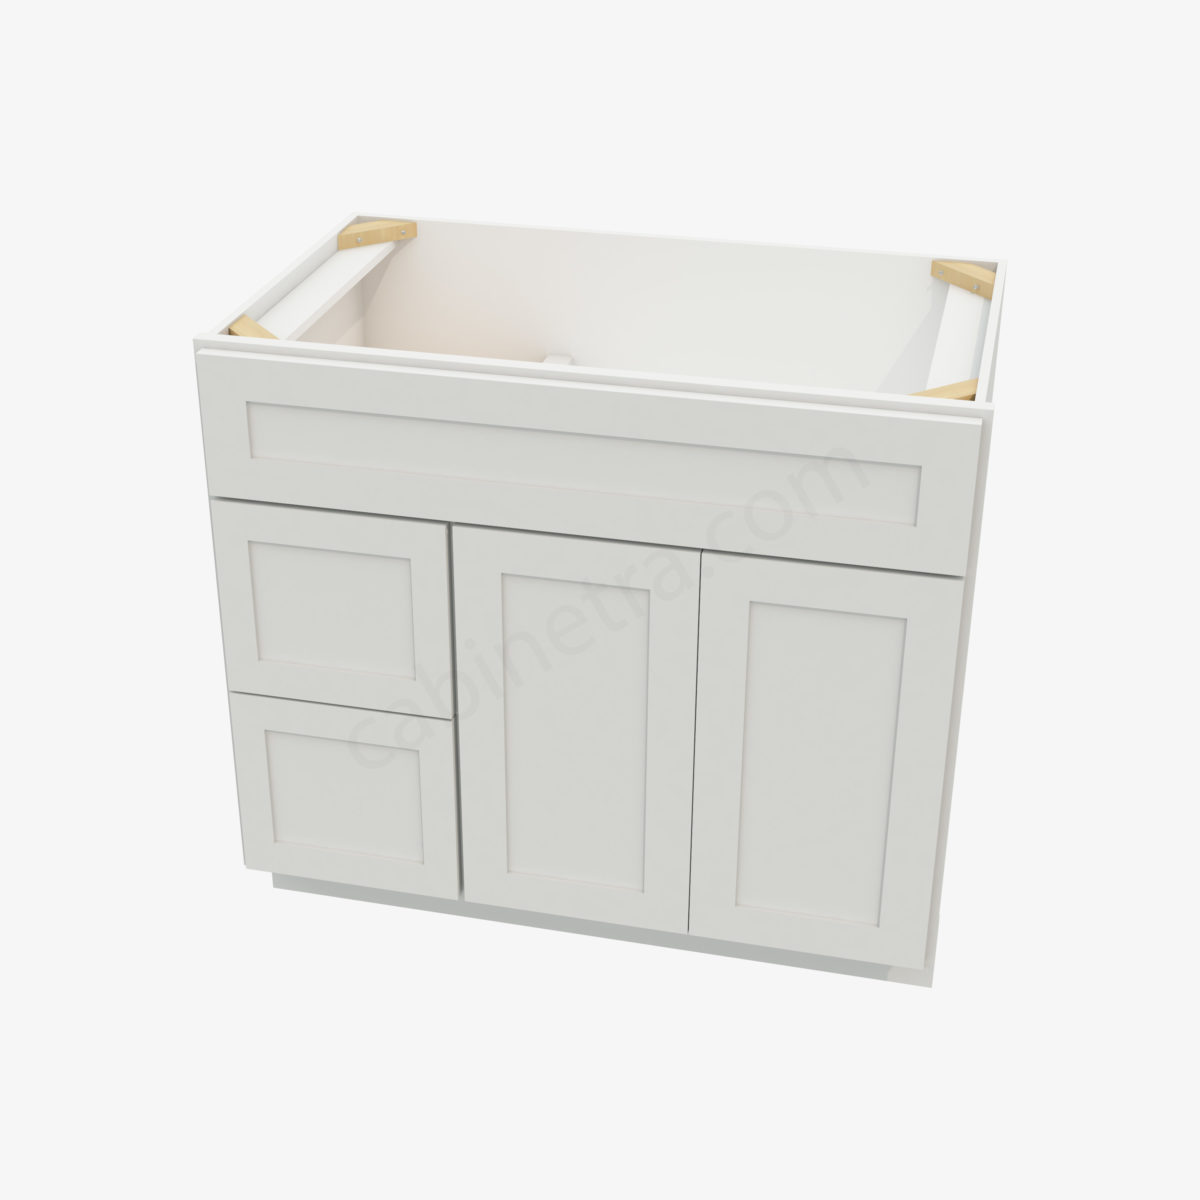 AW S3621BDL 34 3 Forevermark Ice White Shaker Cabinetra scaled